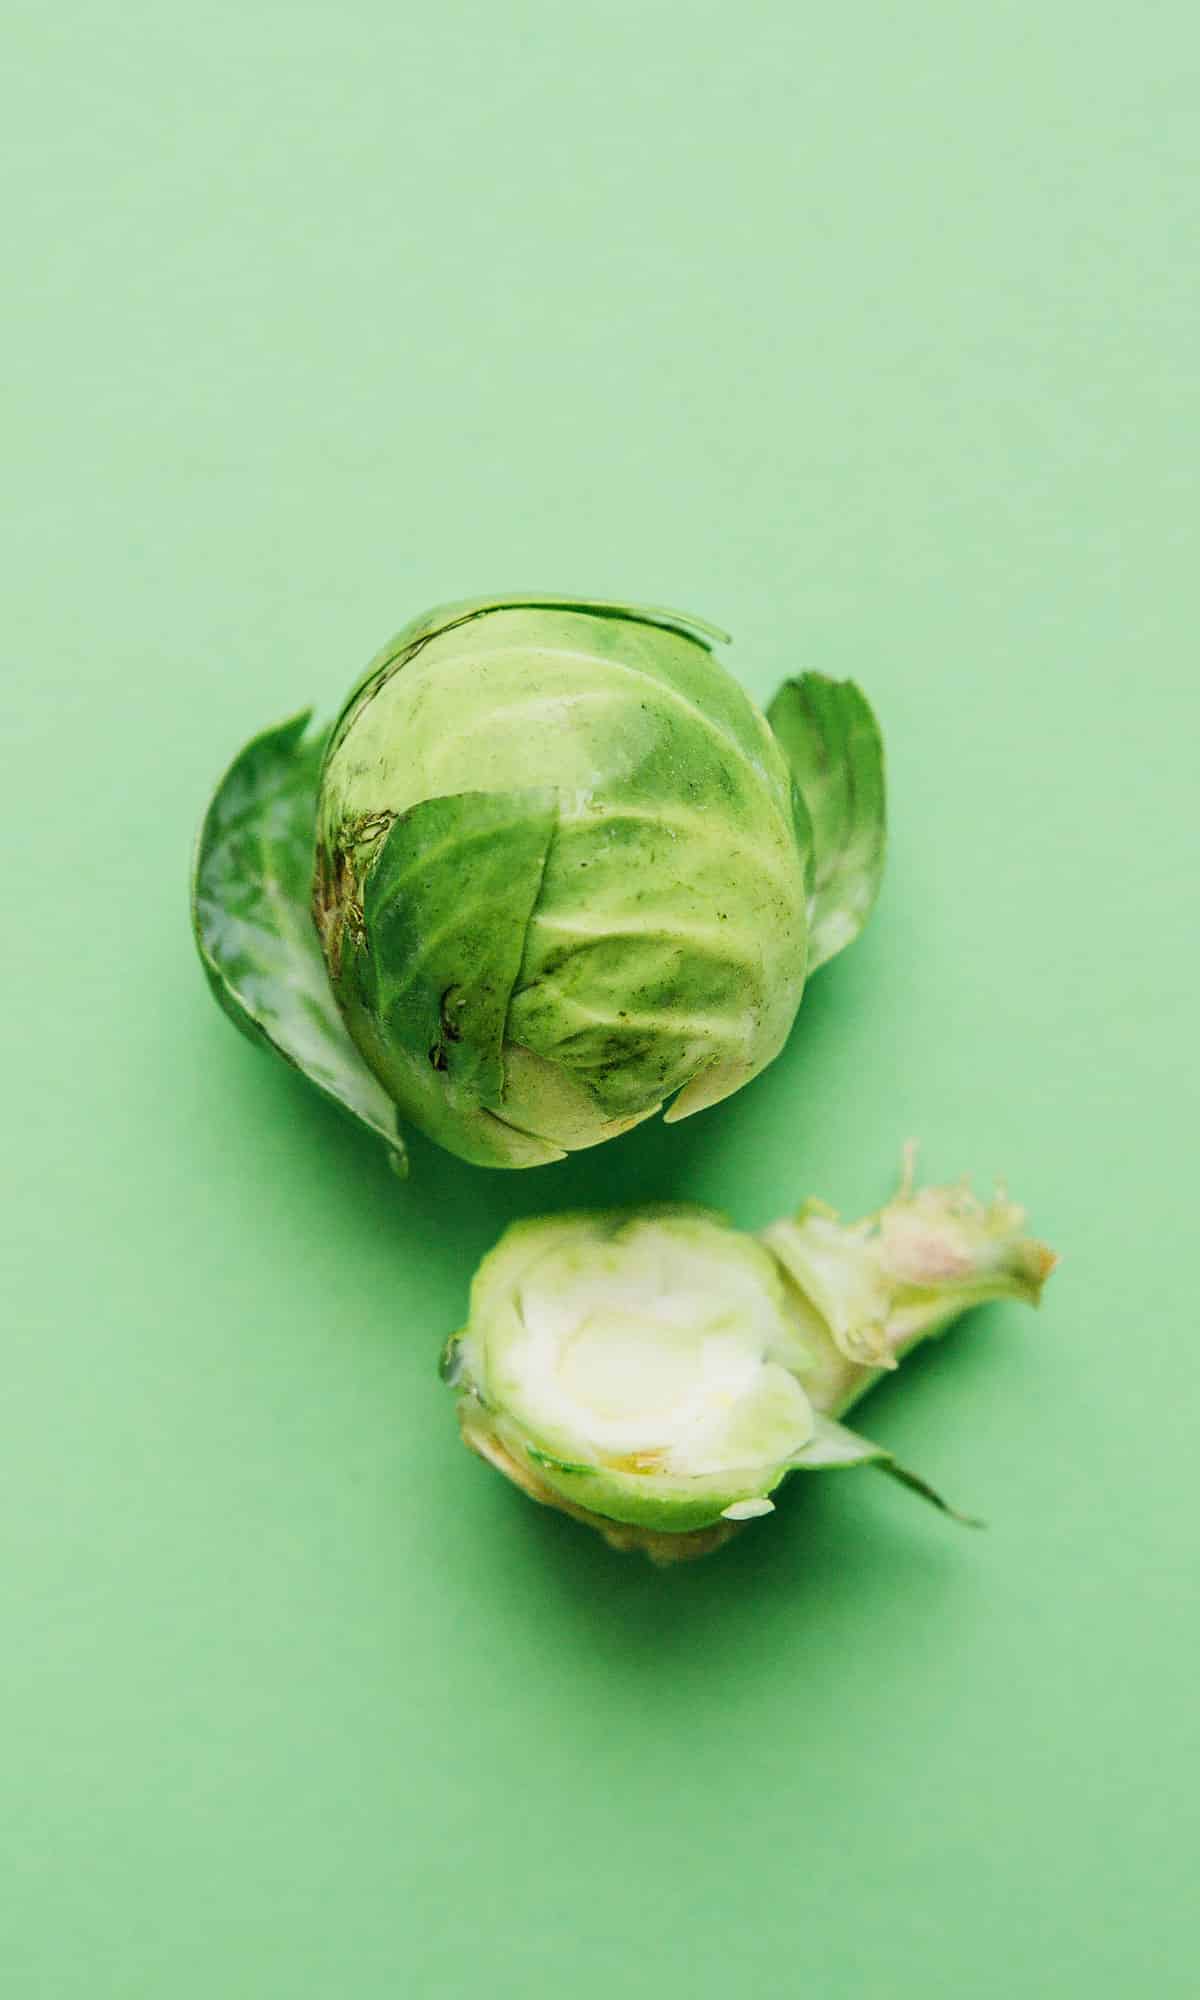 Cutting Brussels sprouts on a green background.